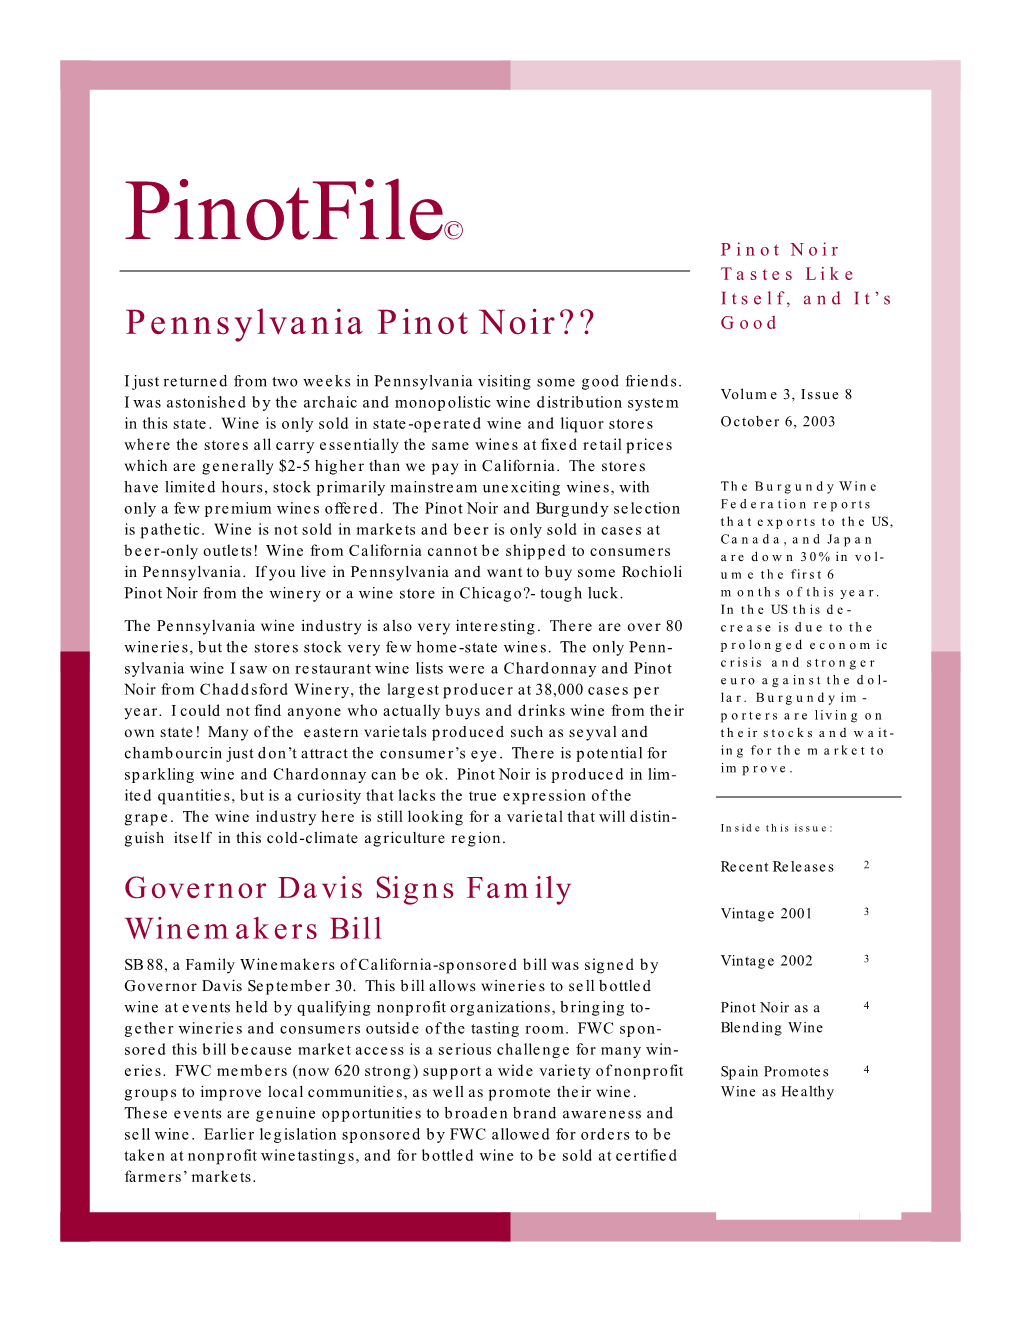 Pinofile Vol 3, Issue 8